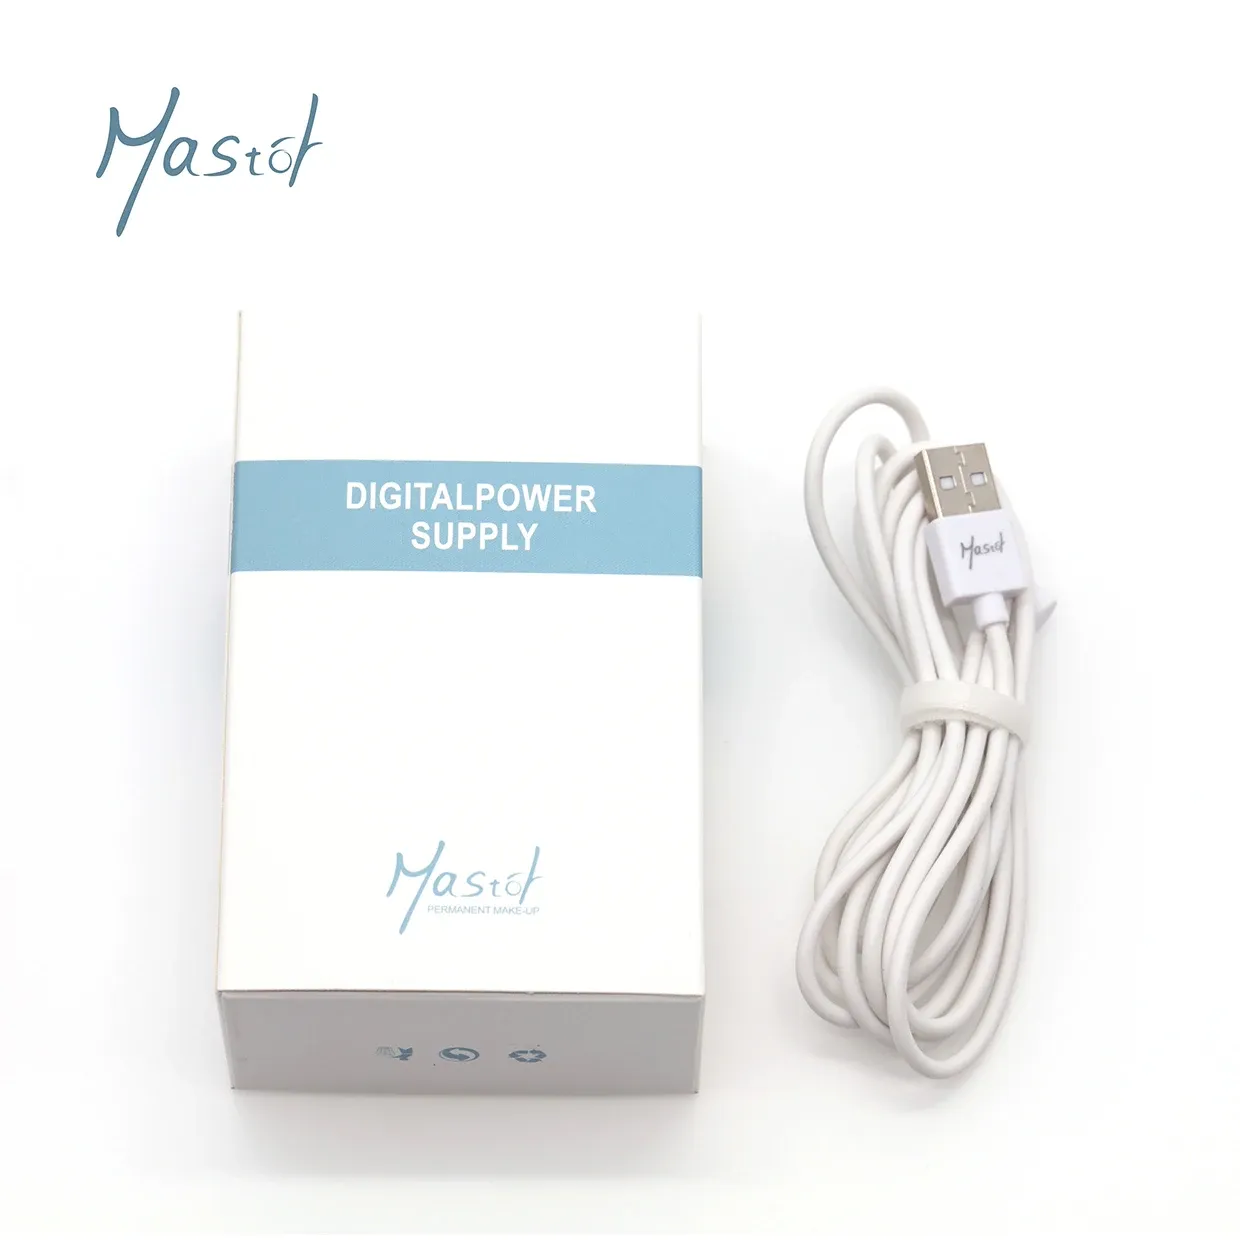 Dresses Goochie Pmu Power Supper Cable and Plug of Mastor Pm Permanent Makeup Hine Connect